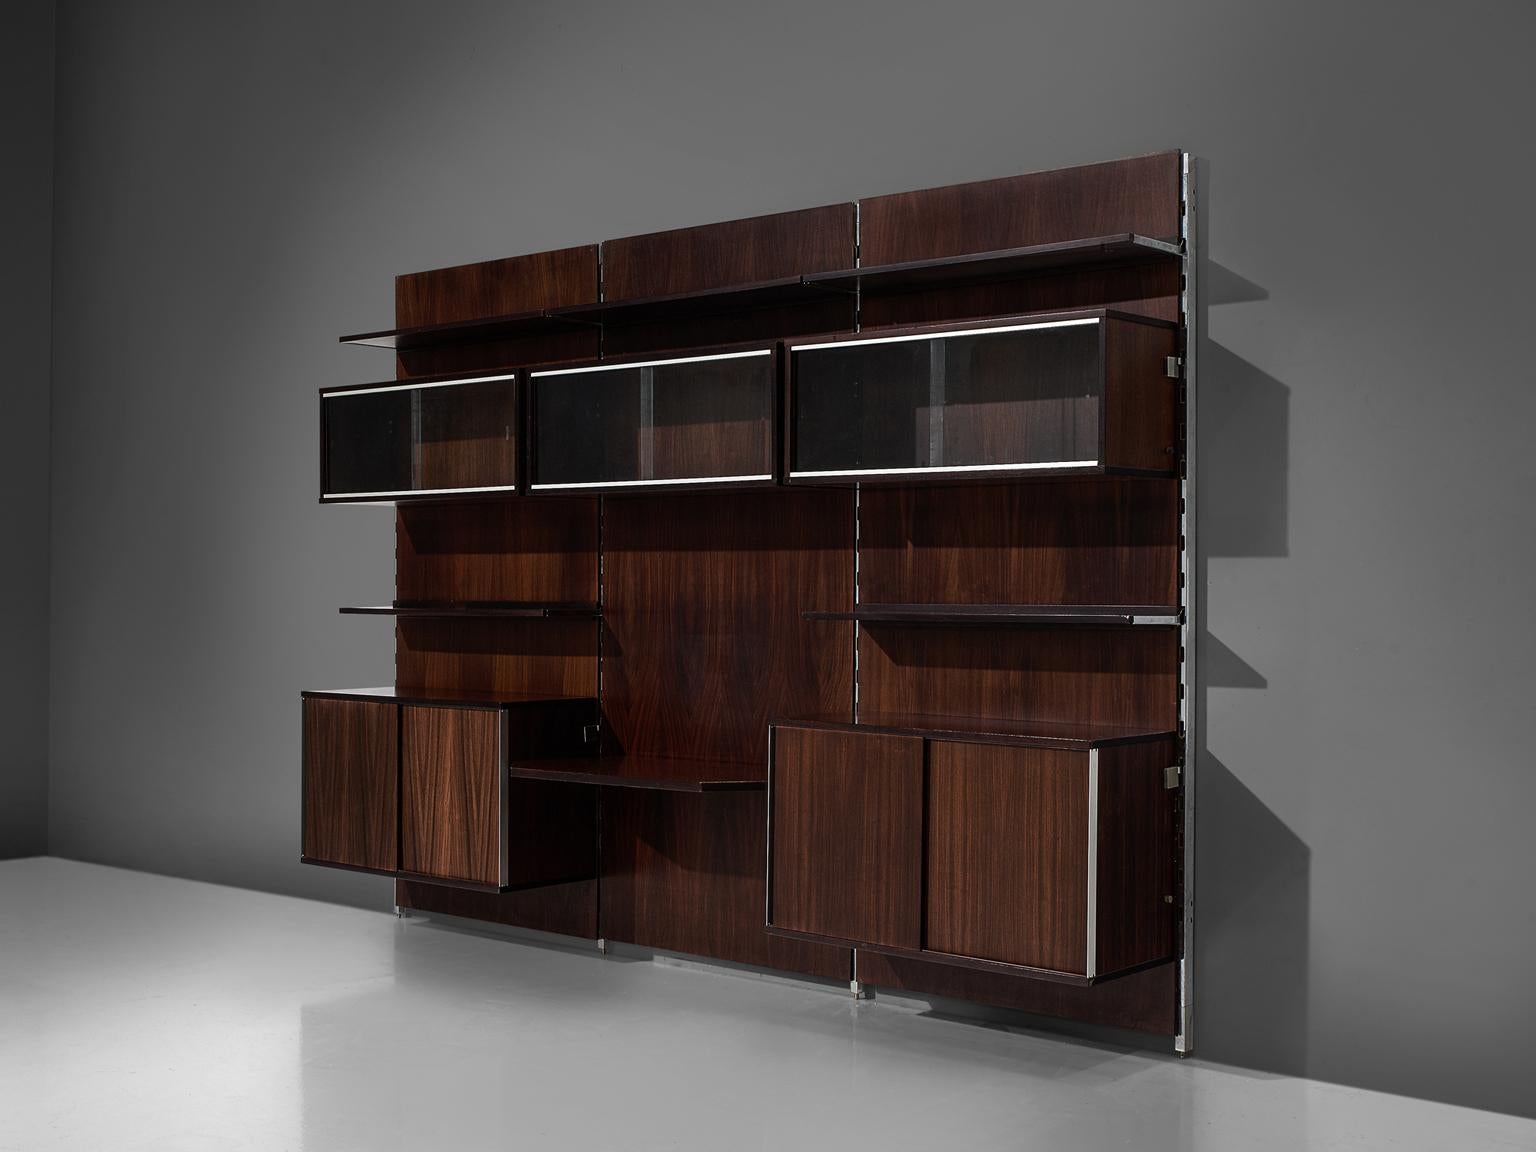 MIM Roma, cabinet, rosewood and metal, Italy, 1960s.

The monumental wall-mounted cabinet consists of four wall panels with various different storage facilities. The finish and details of this shelving wall unit are of a high standard. The piece